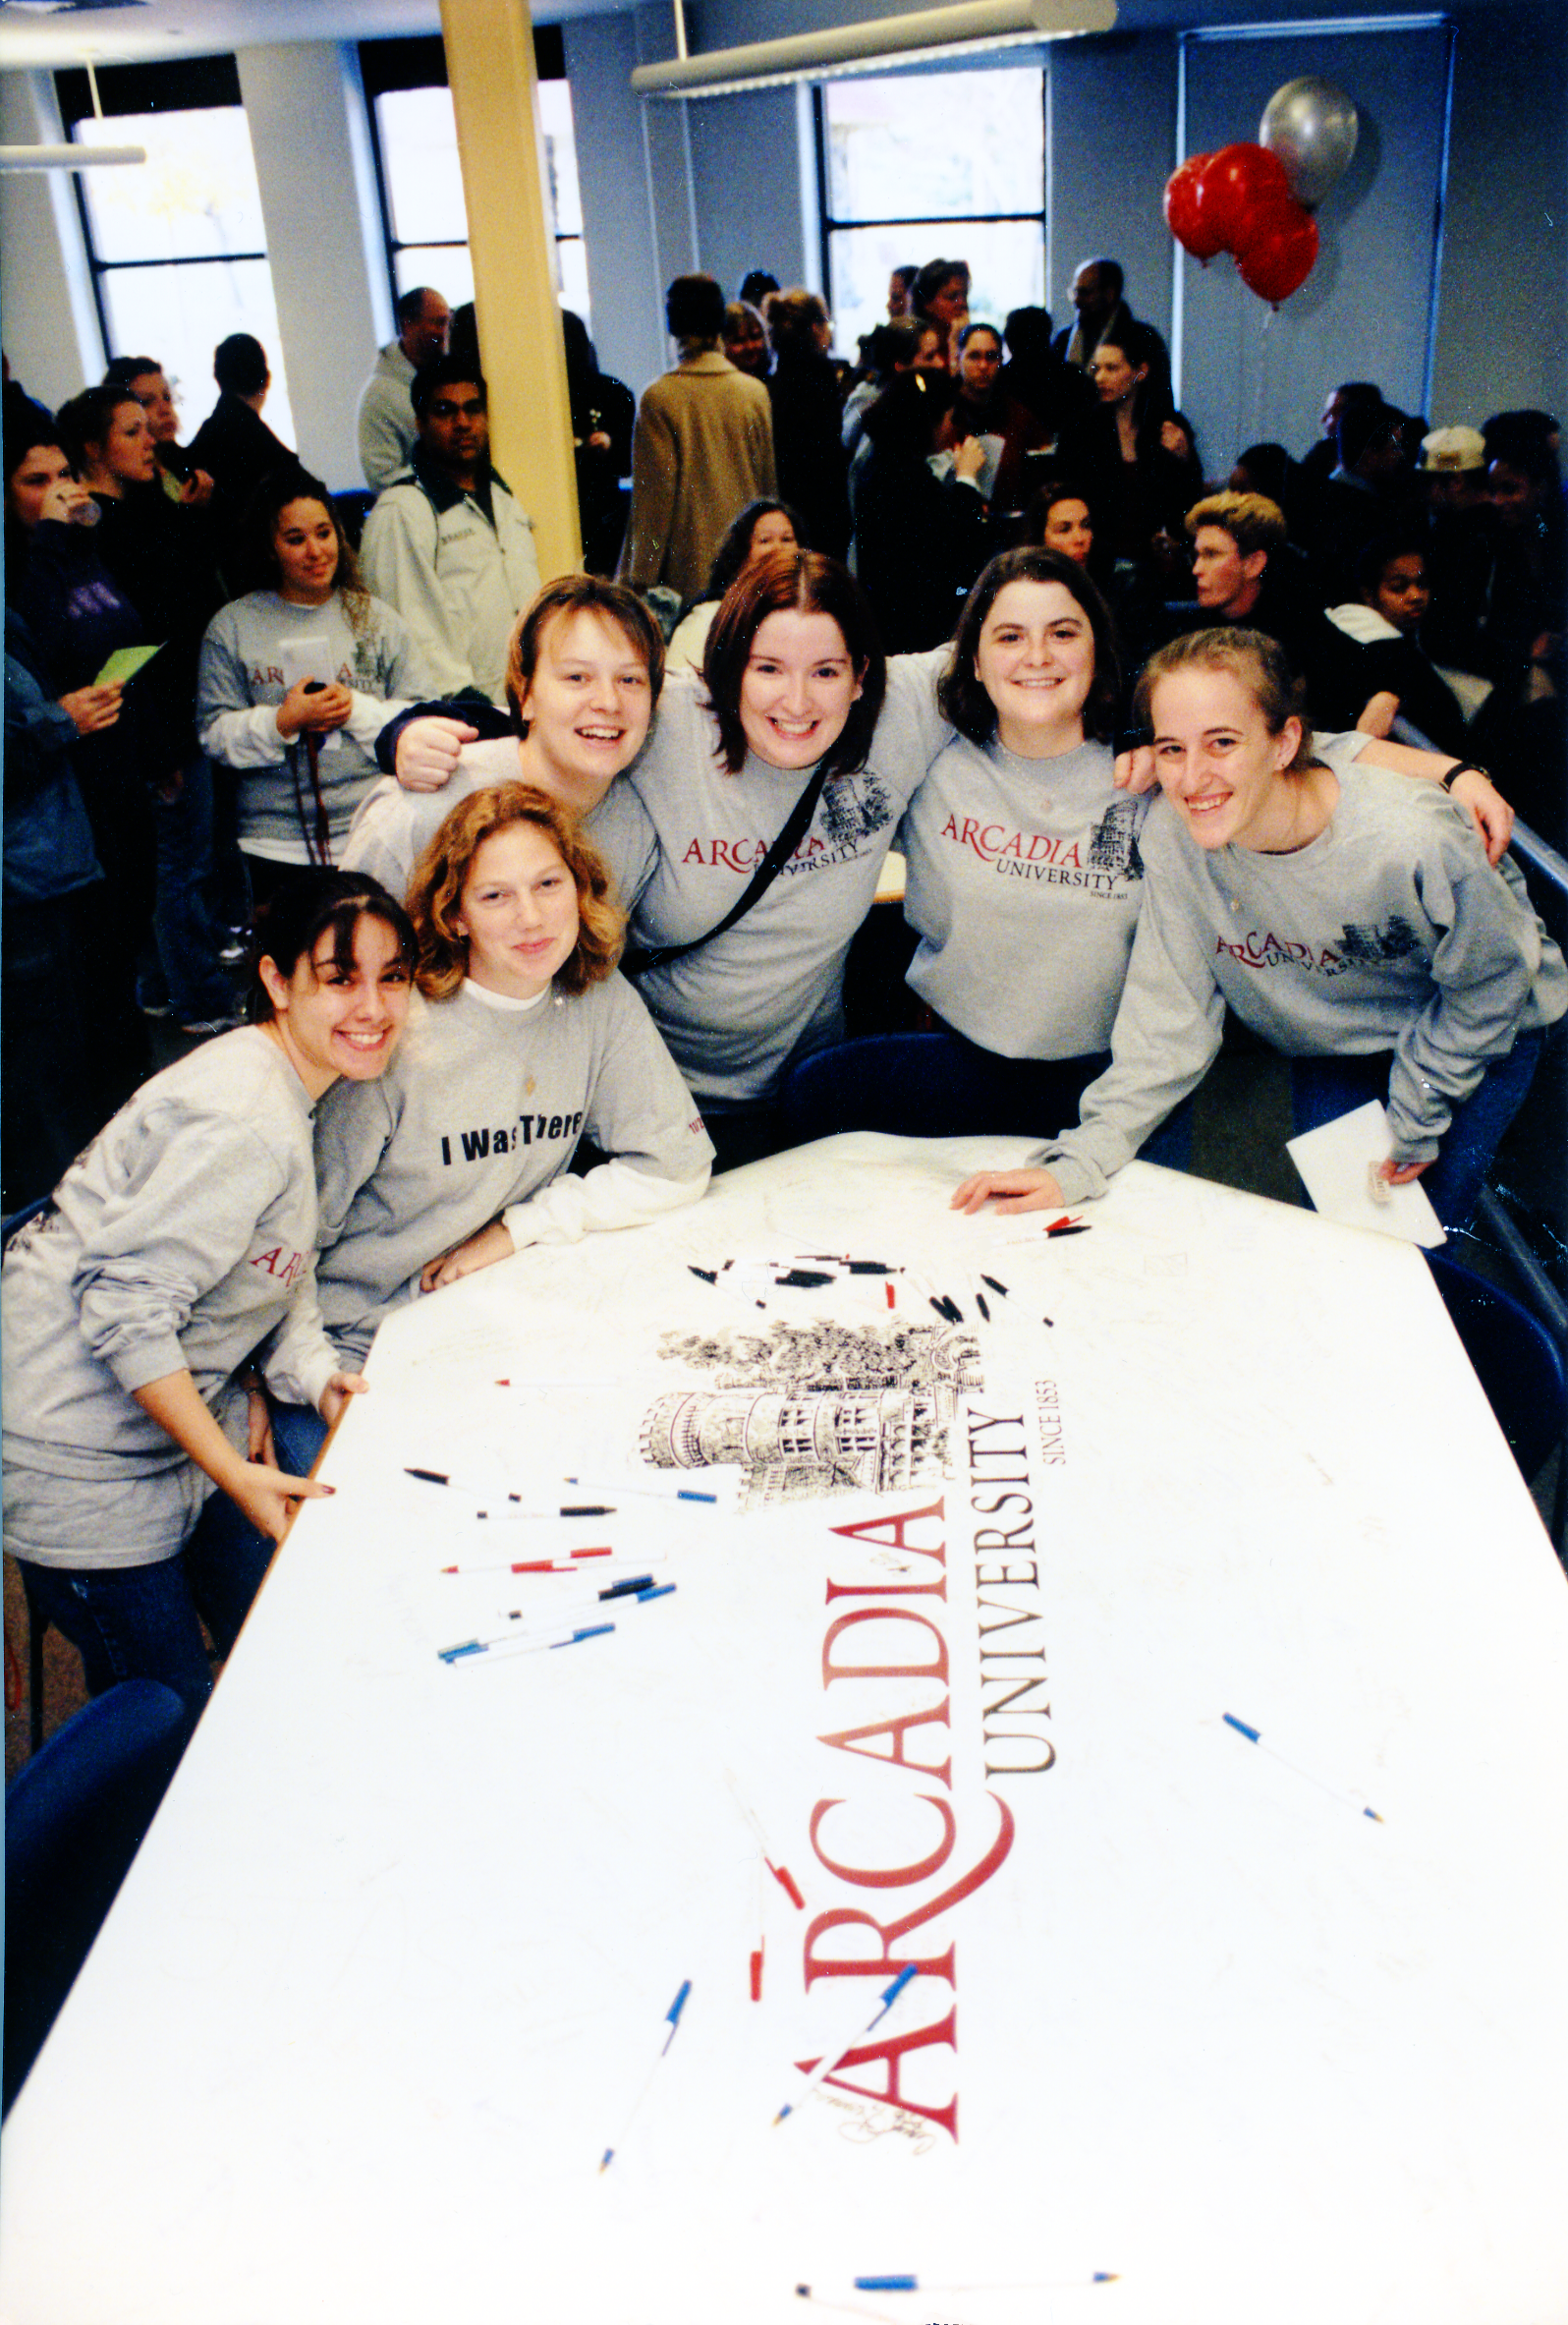 On July 16, 2001, Beaver College becomes Arcadia University. In November of the previous academic year, the name change was announced to students at a midnight celebration.